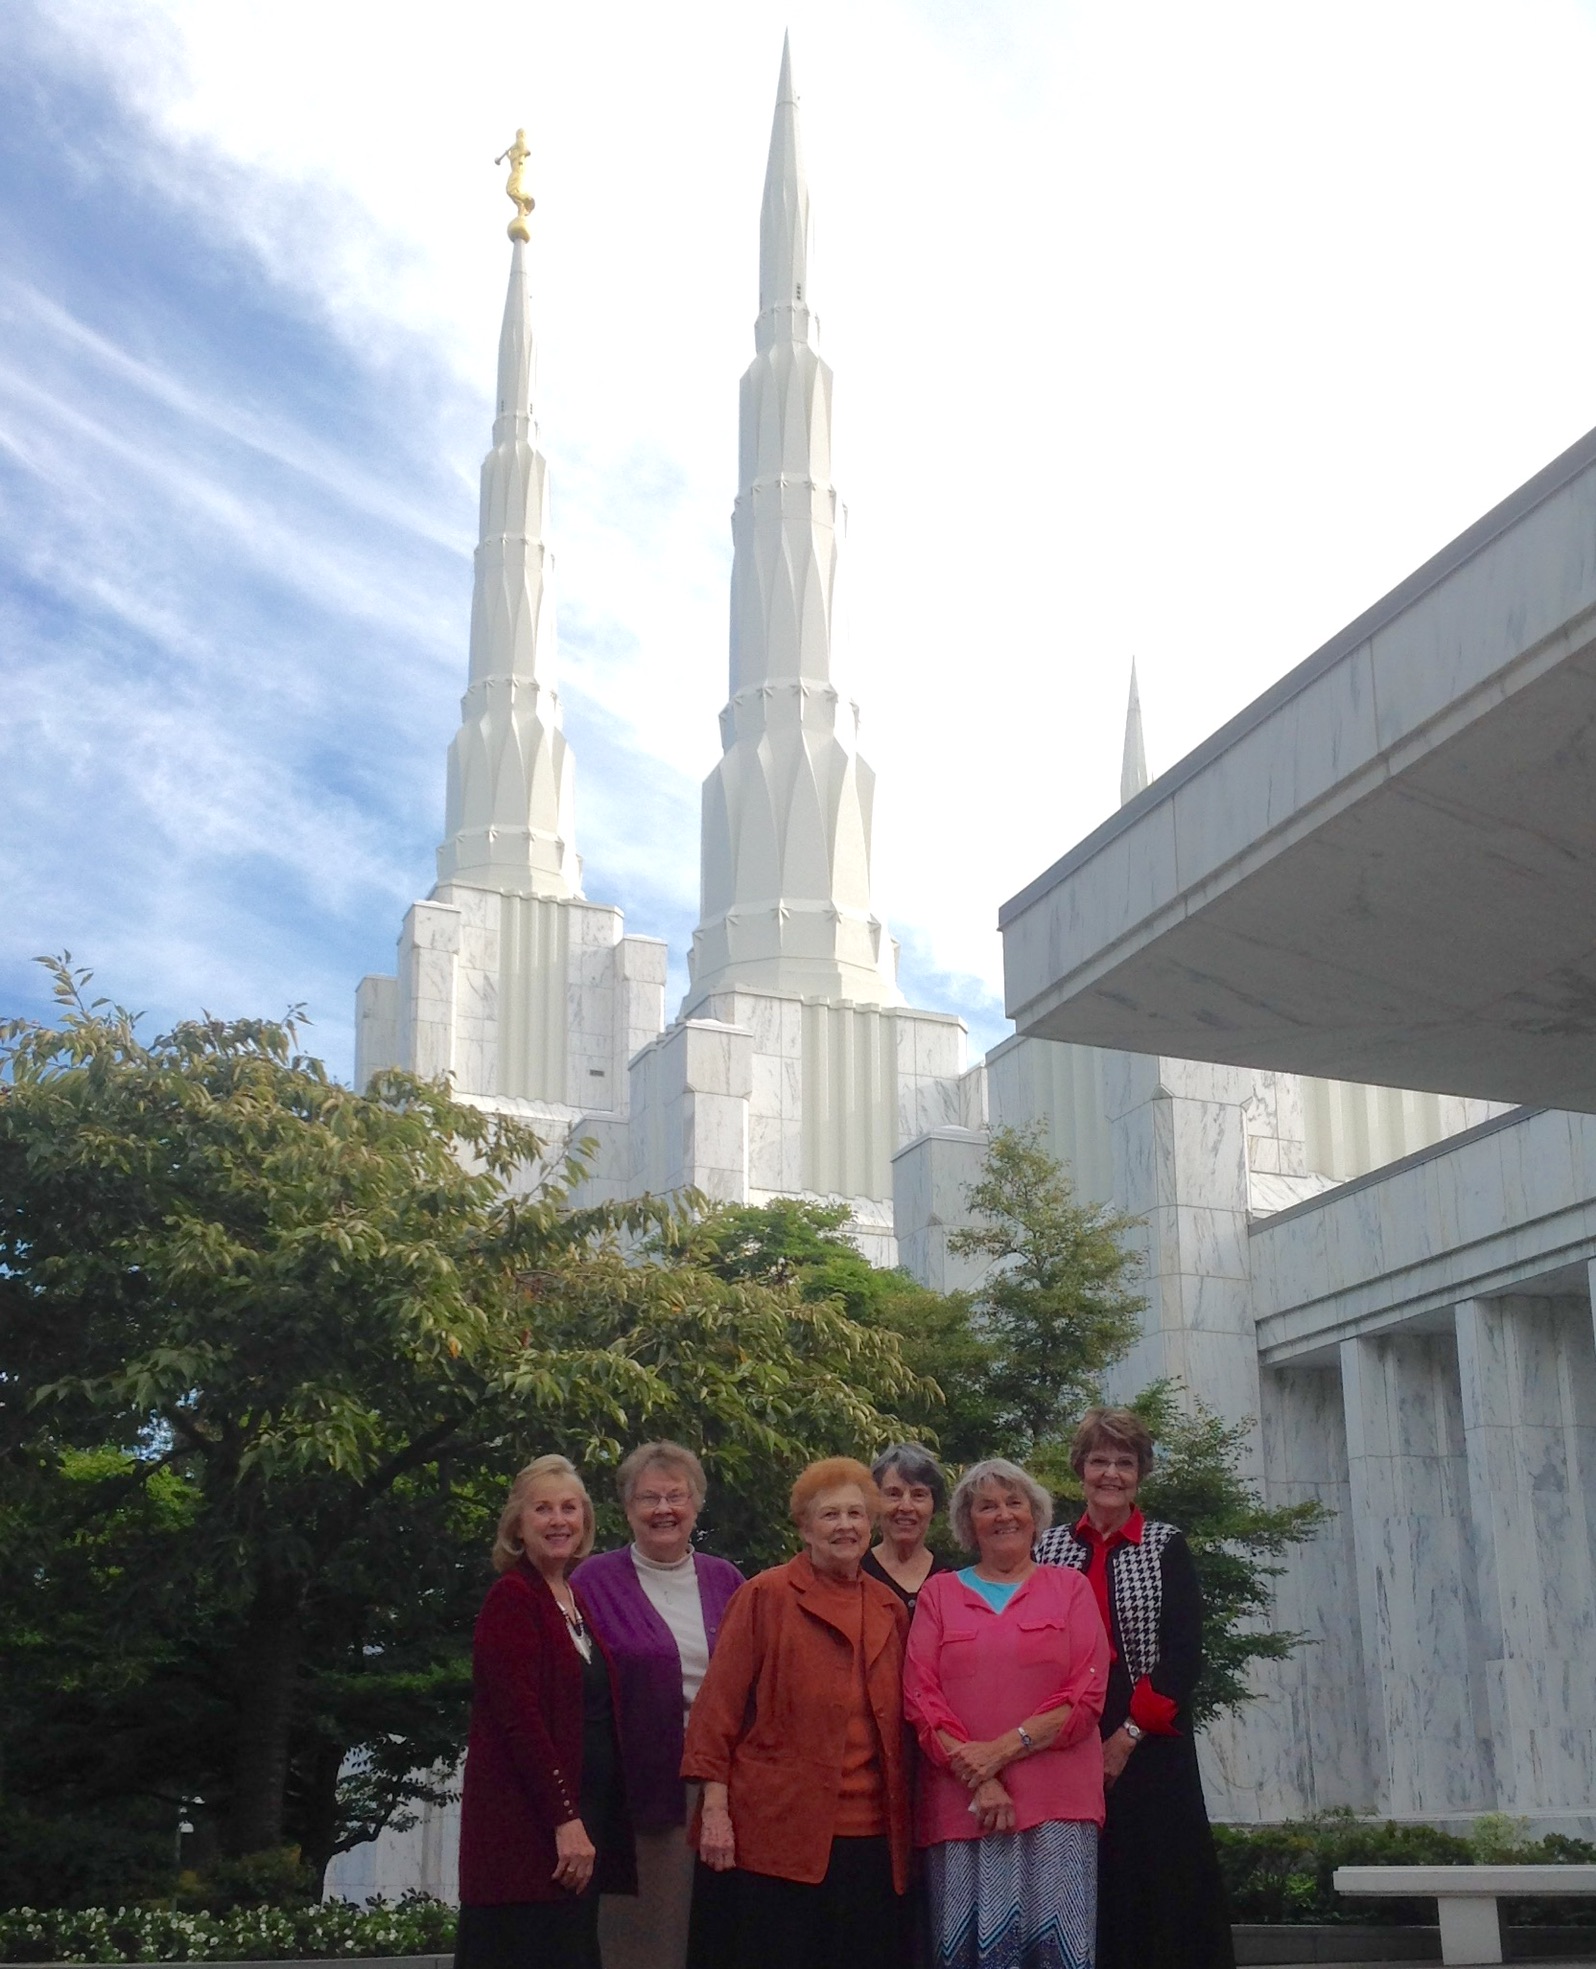 The six roommates ended their trip with a visit to the Portland temple on the night of Sept. 29, 2016.